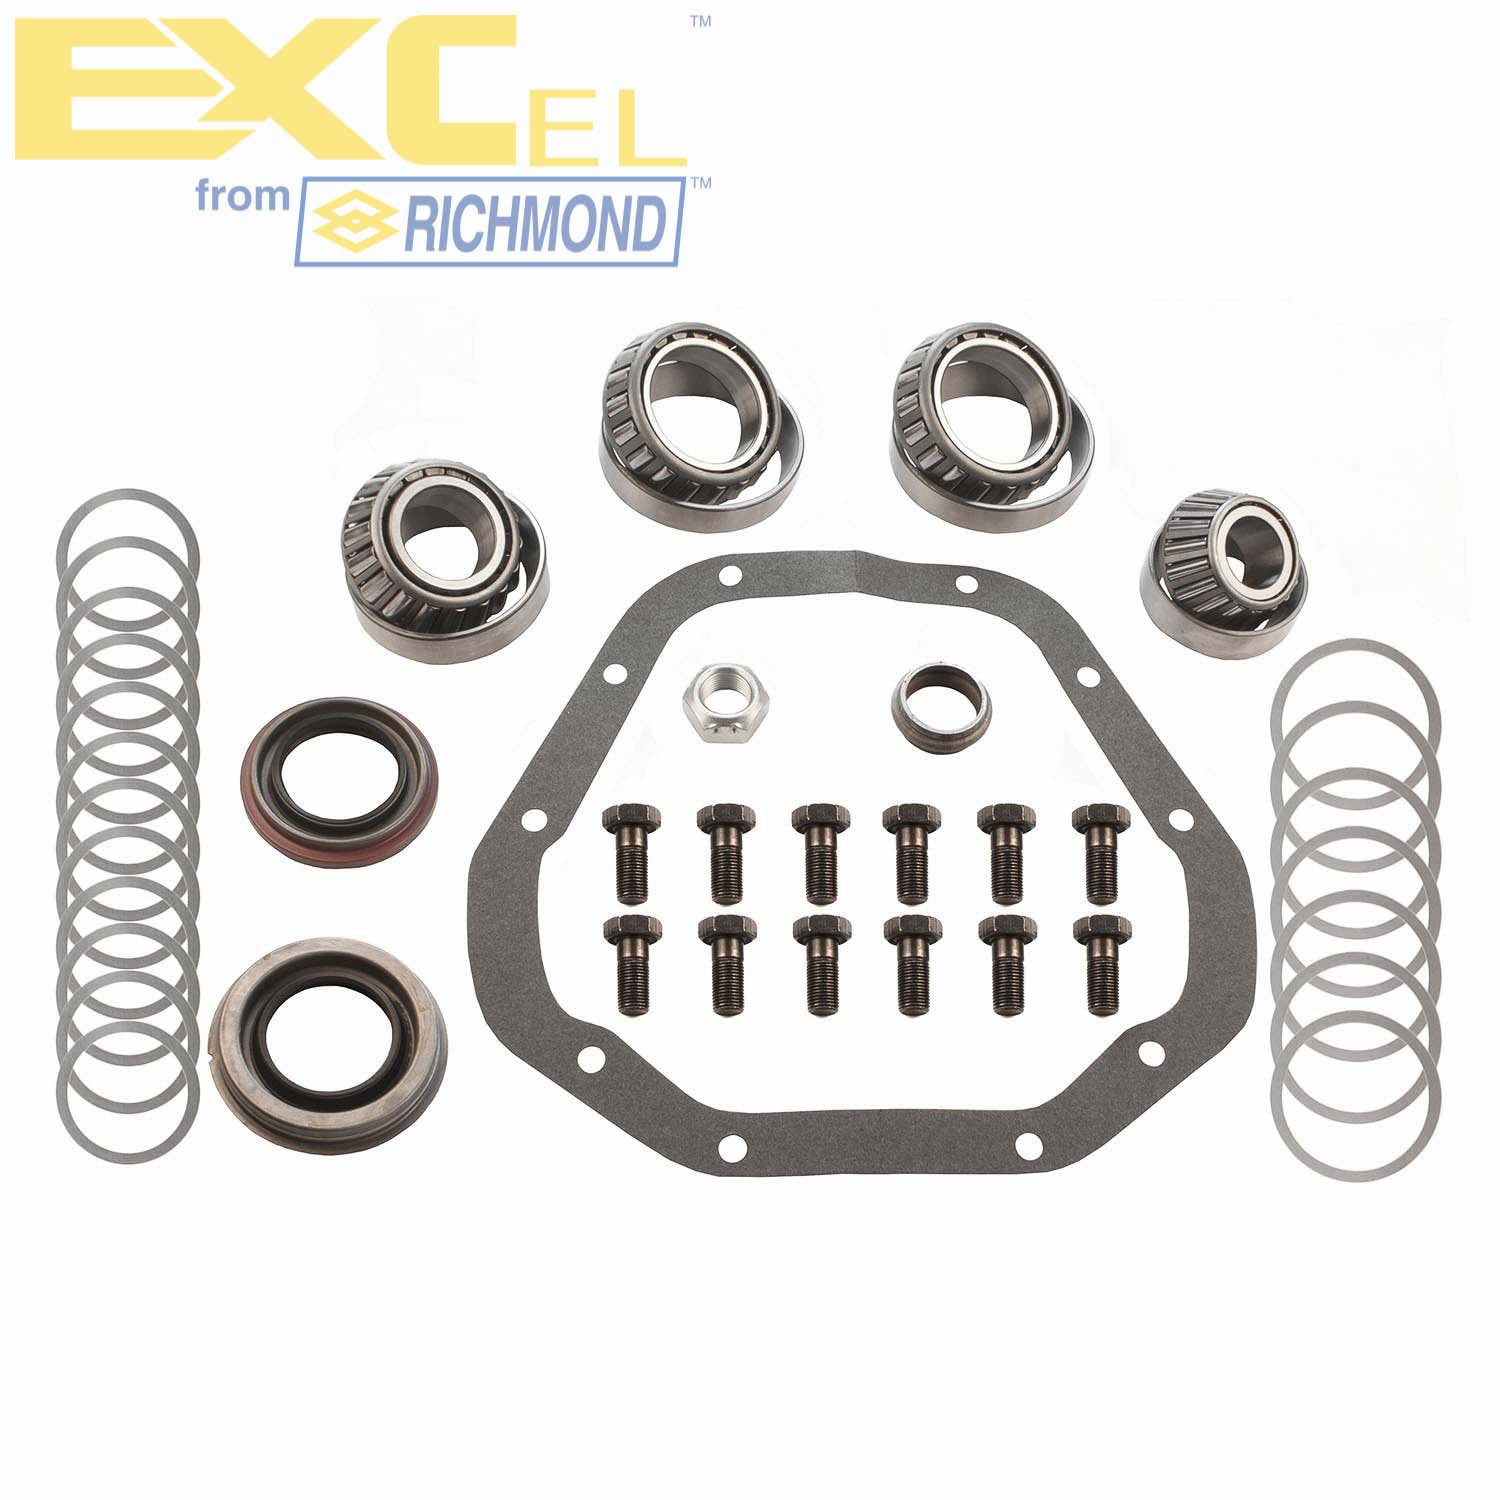 Excel XL-1035-1 Differential Bearing Kit